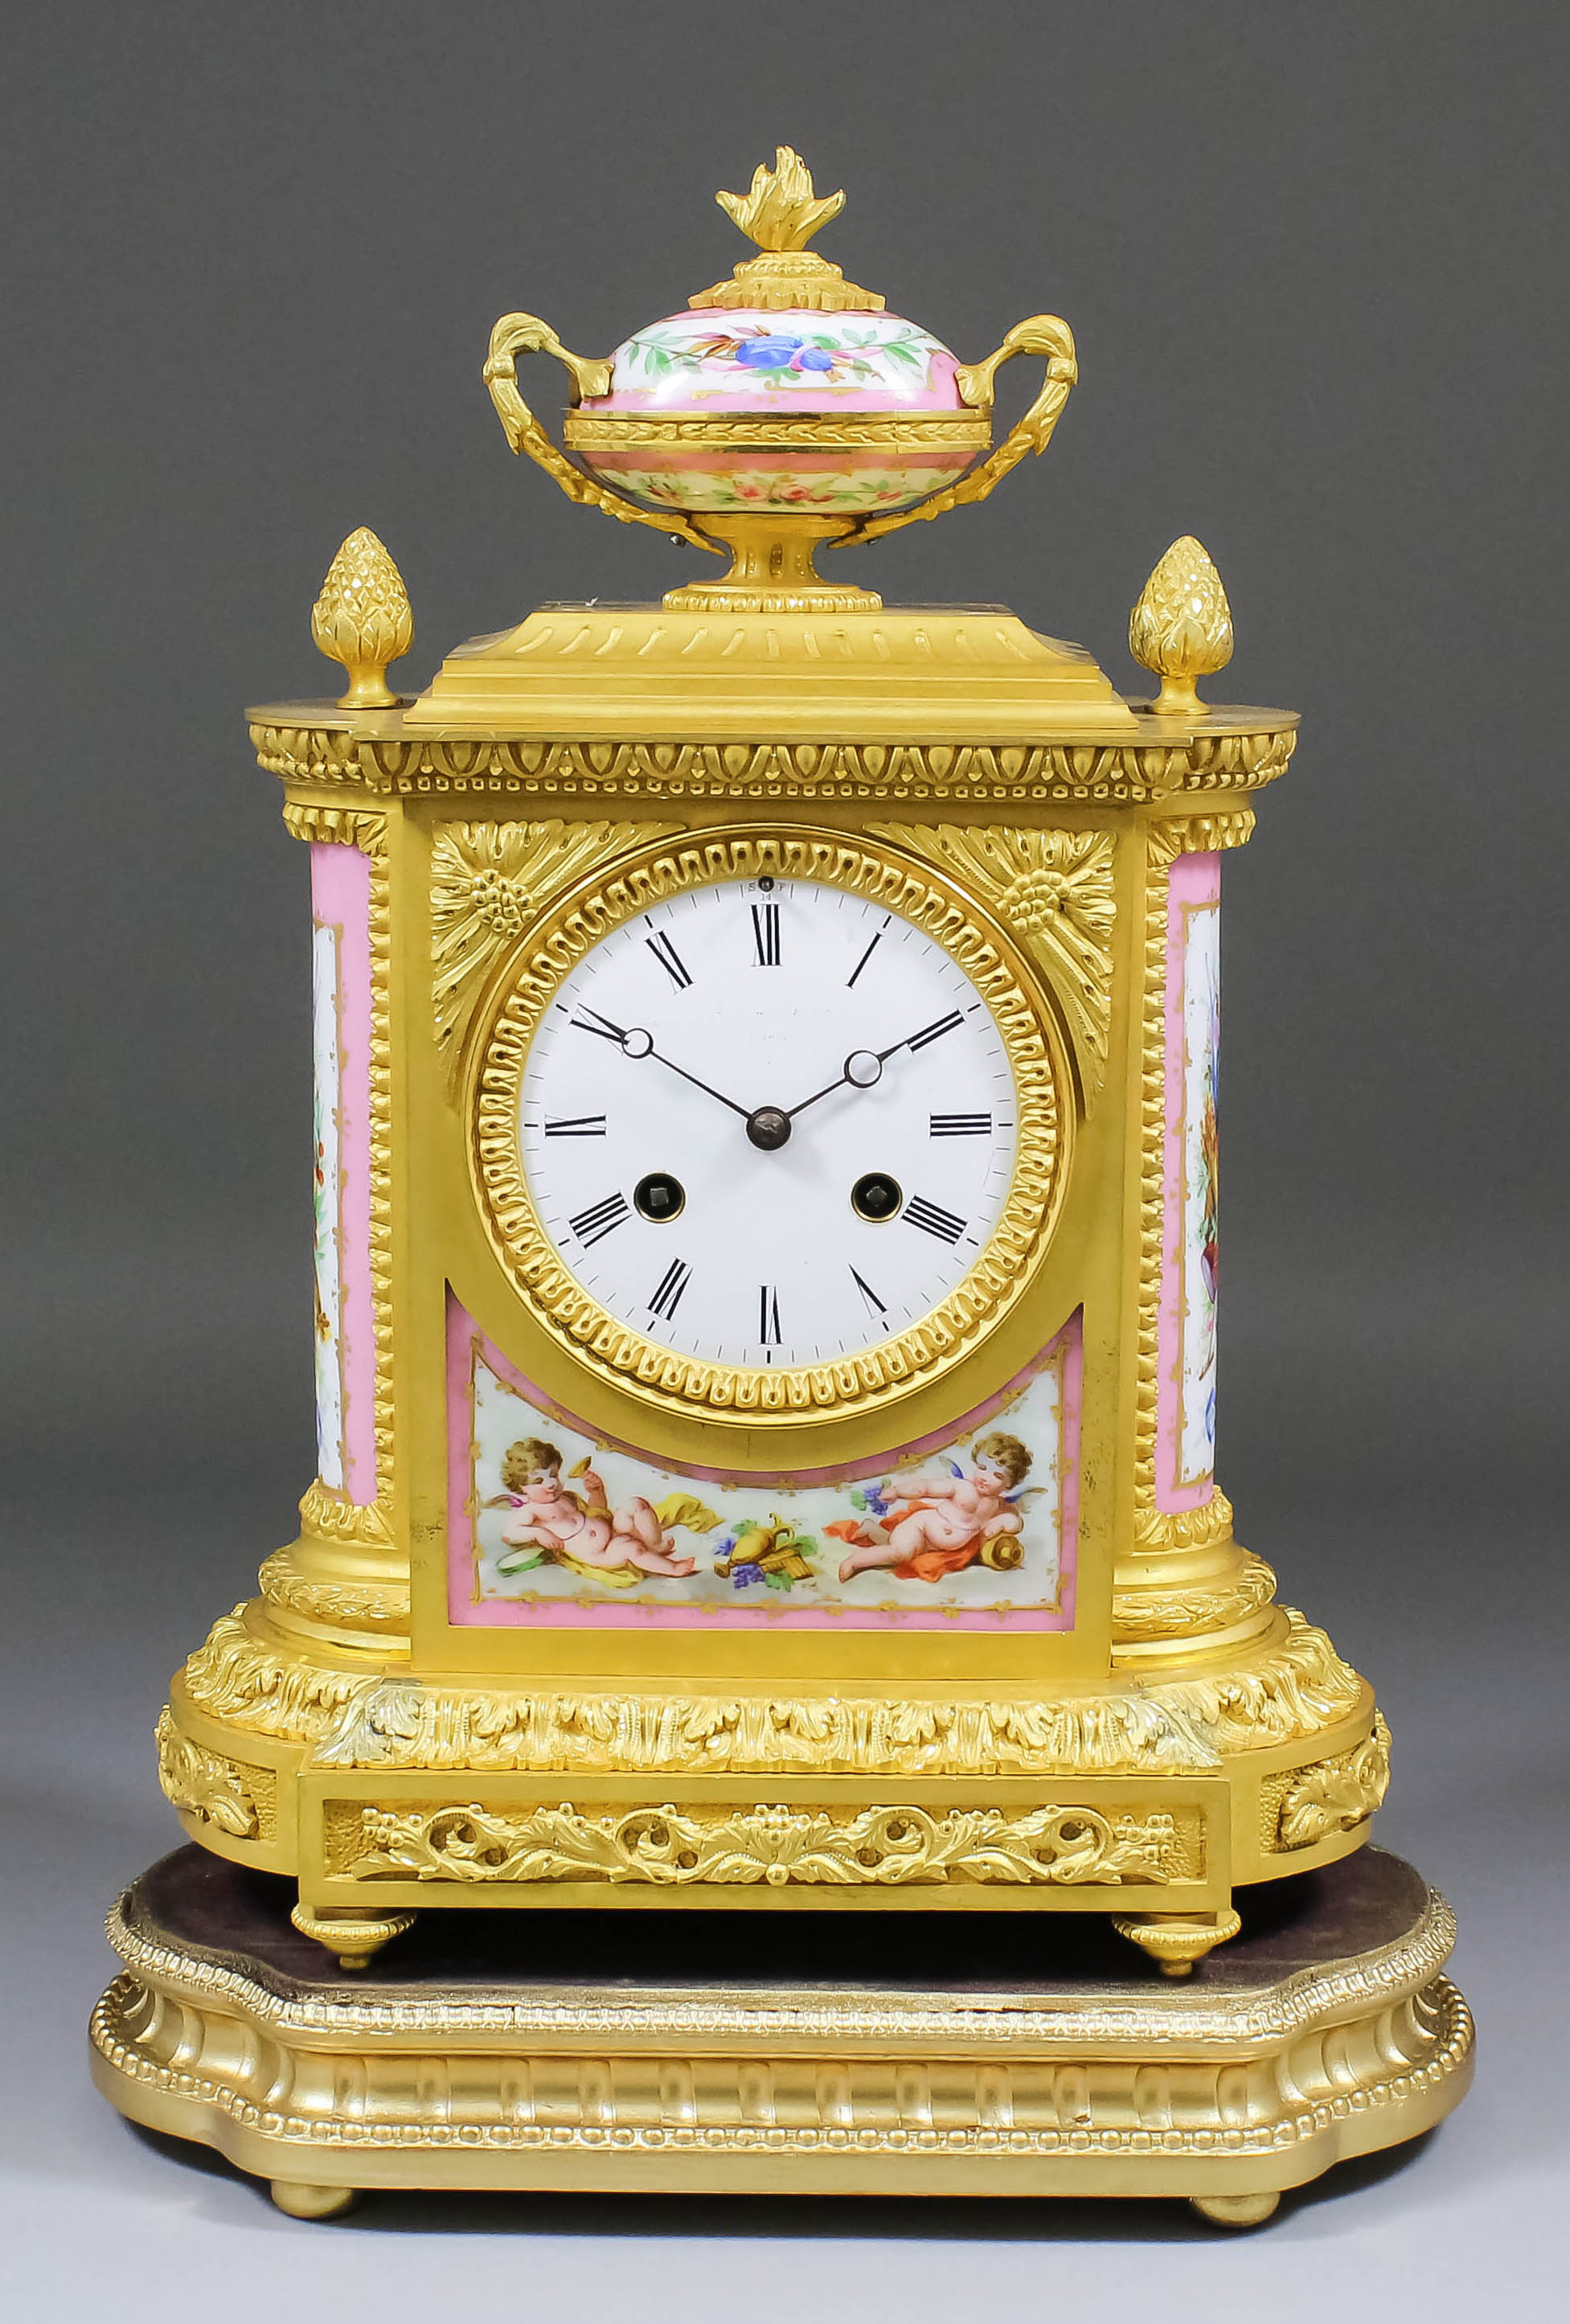 A mid 19th Century French ormolu and porcelain mounted mantel clock by J.B.D., No. 2936 16, the 3.